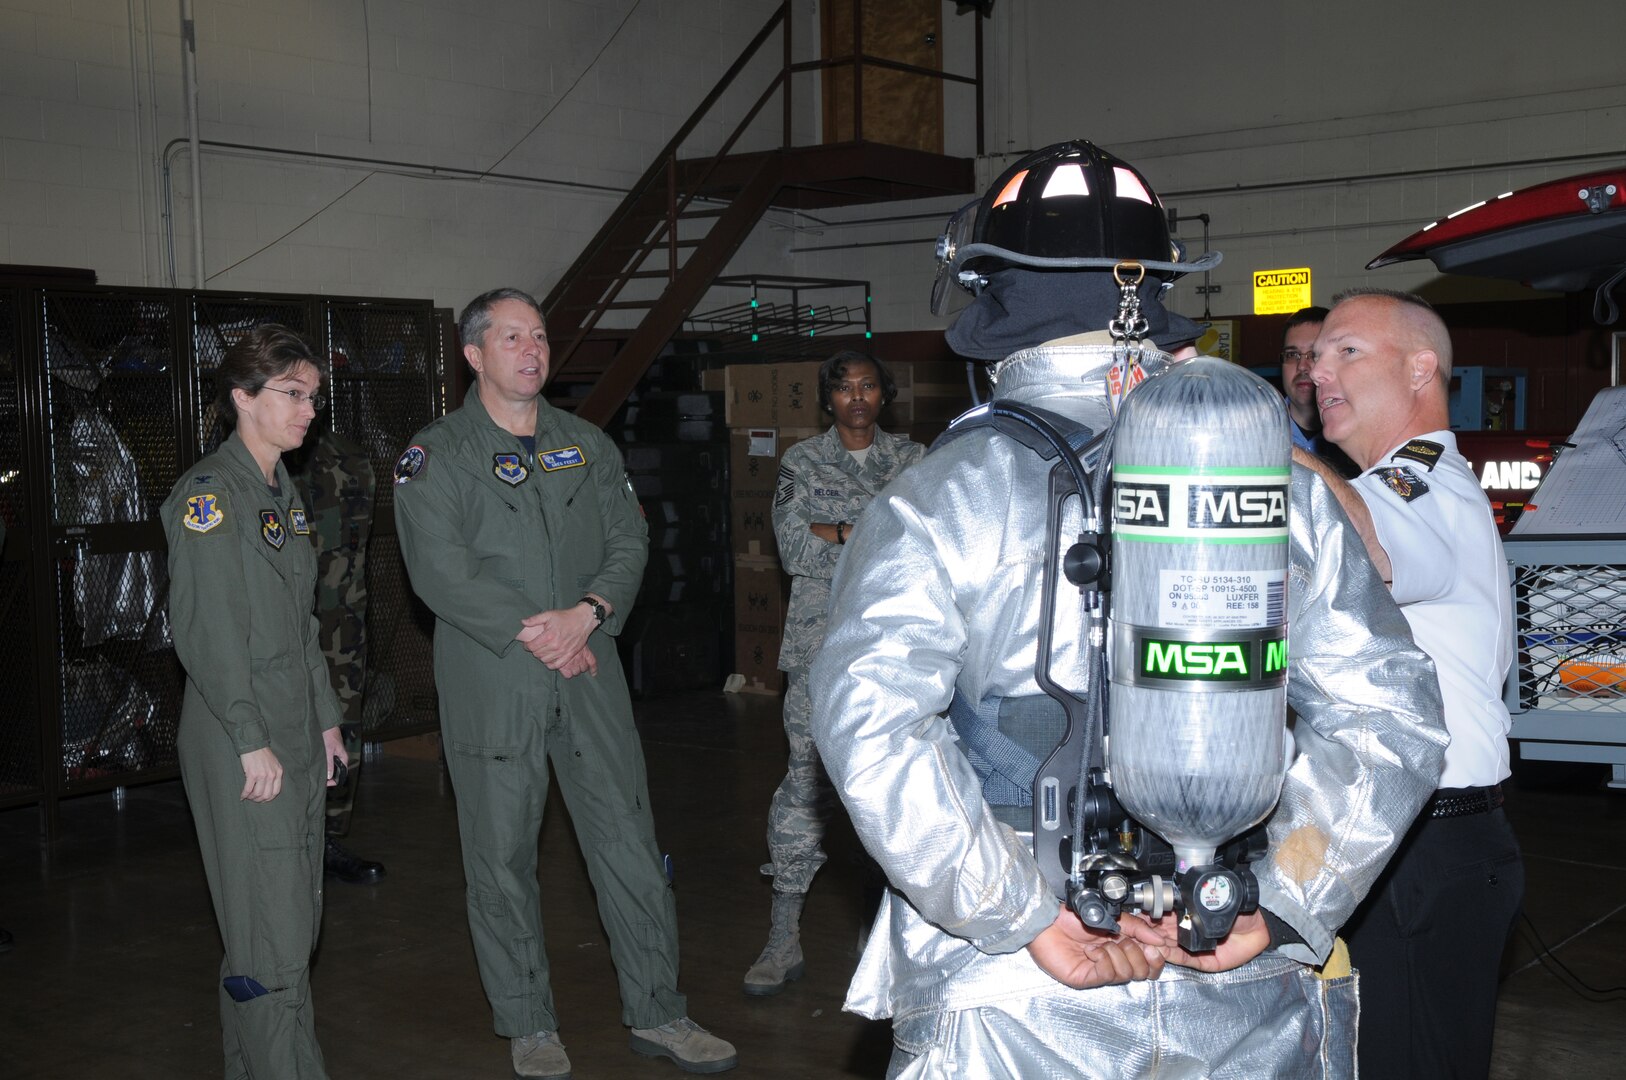 Col. Jacqueline Van Ovost, 12th Flying Training Wing commander, and Maj. Gen. Gregory Feest, 19th Air Force commander, visit with Randolph Fire Emergency Services personnel during a tour of the facilities. General Feest visited several areas of the 12th Flying Training Wing Jan. 29-30 to learn more about the wing and its Airmen. (U.S. Air Force photo by Joel Martinez)